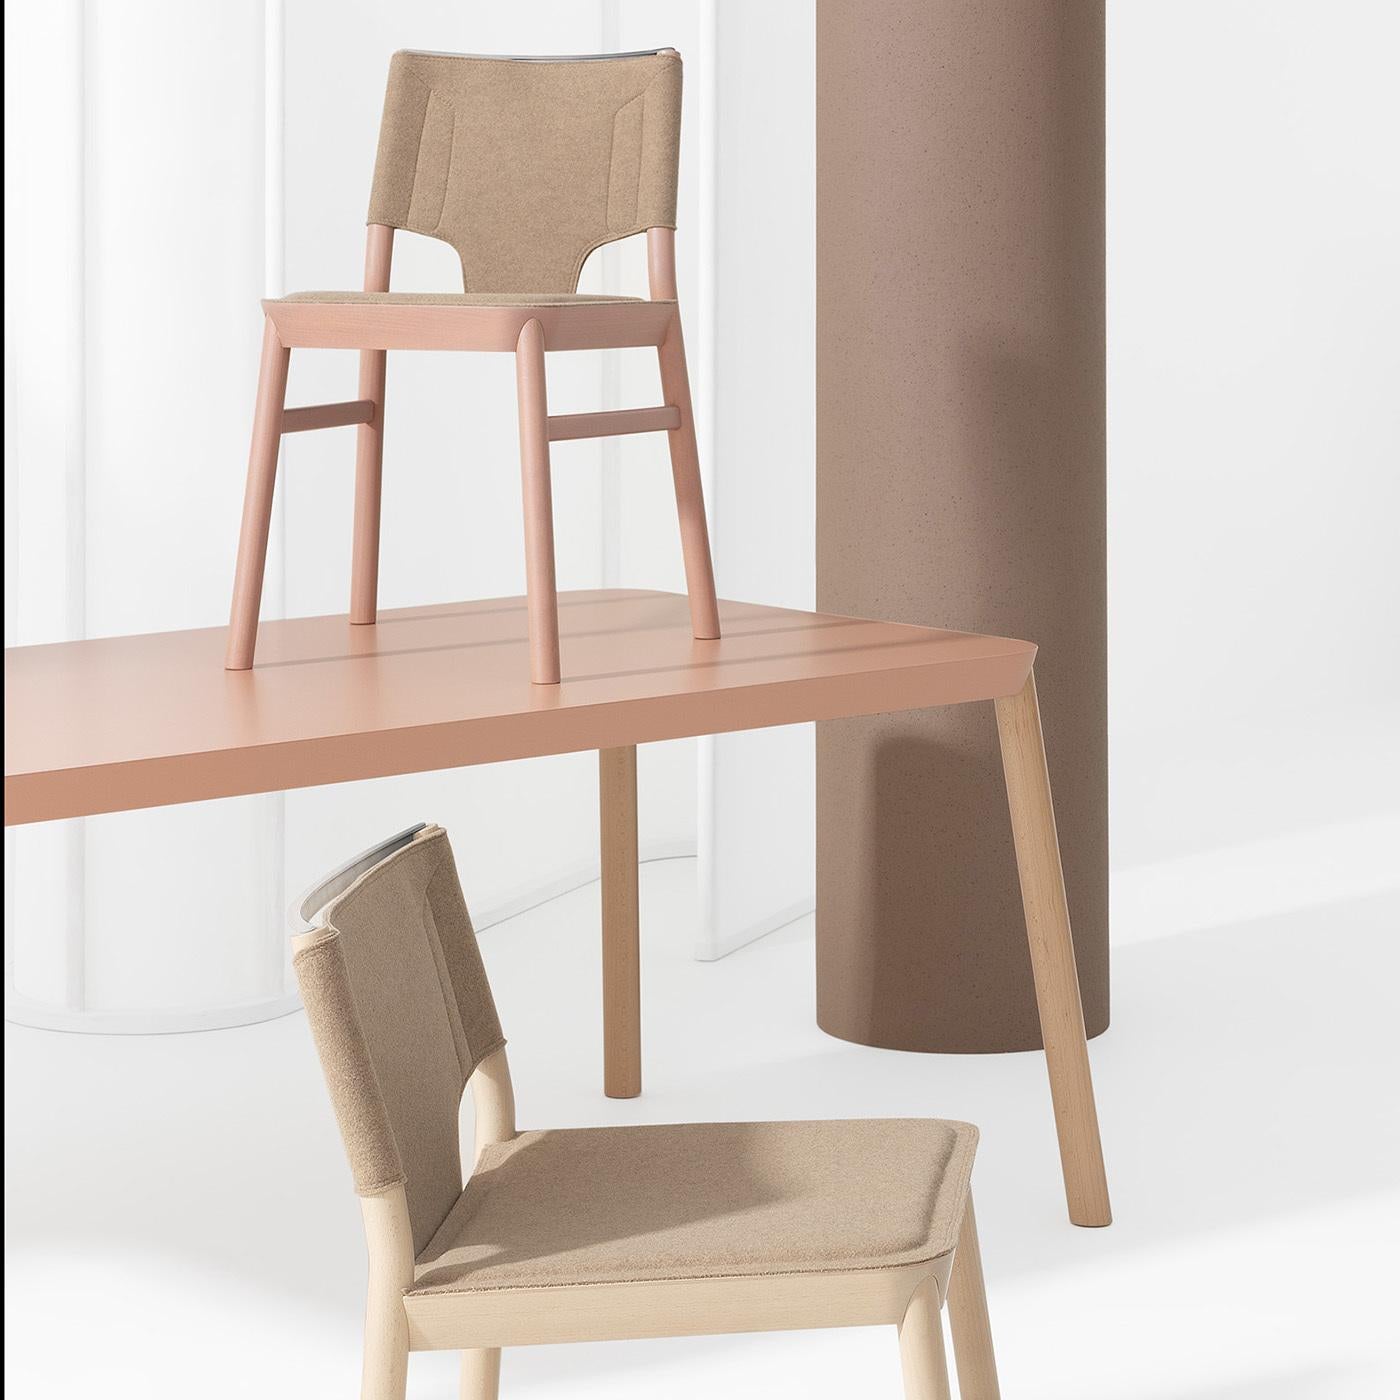 This refined version of the Marimba chair will effortlessly complement modern interiors with its sophisticated yet sober aesthetic. The sleek frame in solid beech is tinted in beige red and features slightly slanted legs as support for the open